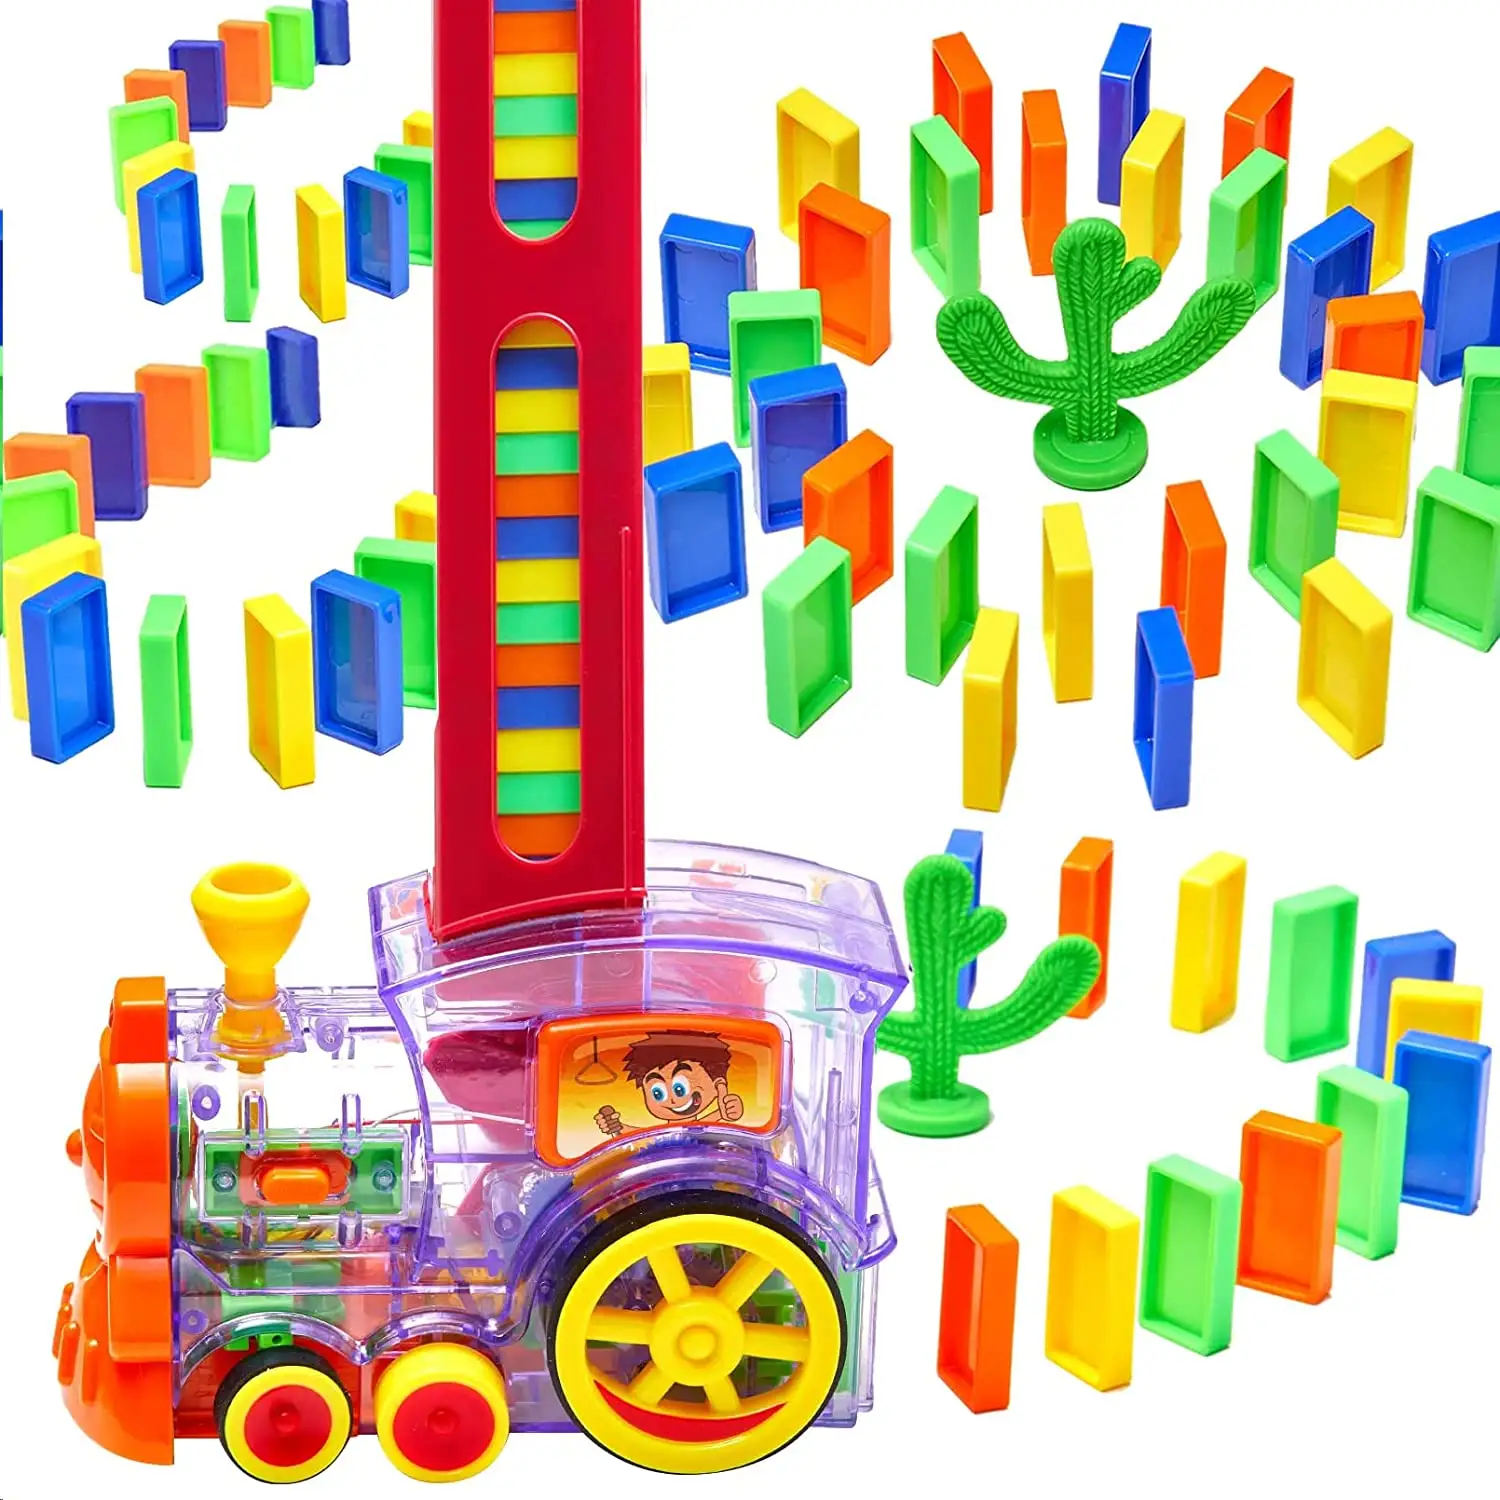 DWI 80pcs Dominos Train Blocks Set Domino Train Toy with Lights Sounds Blocks Domino Set Building and Stacking Toy for KID